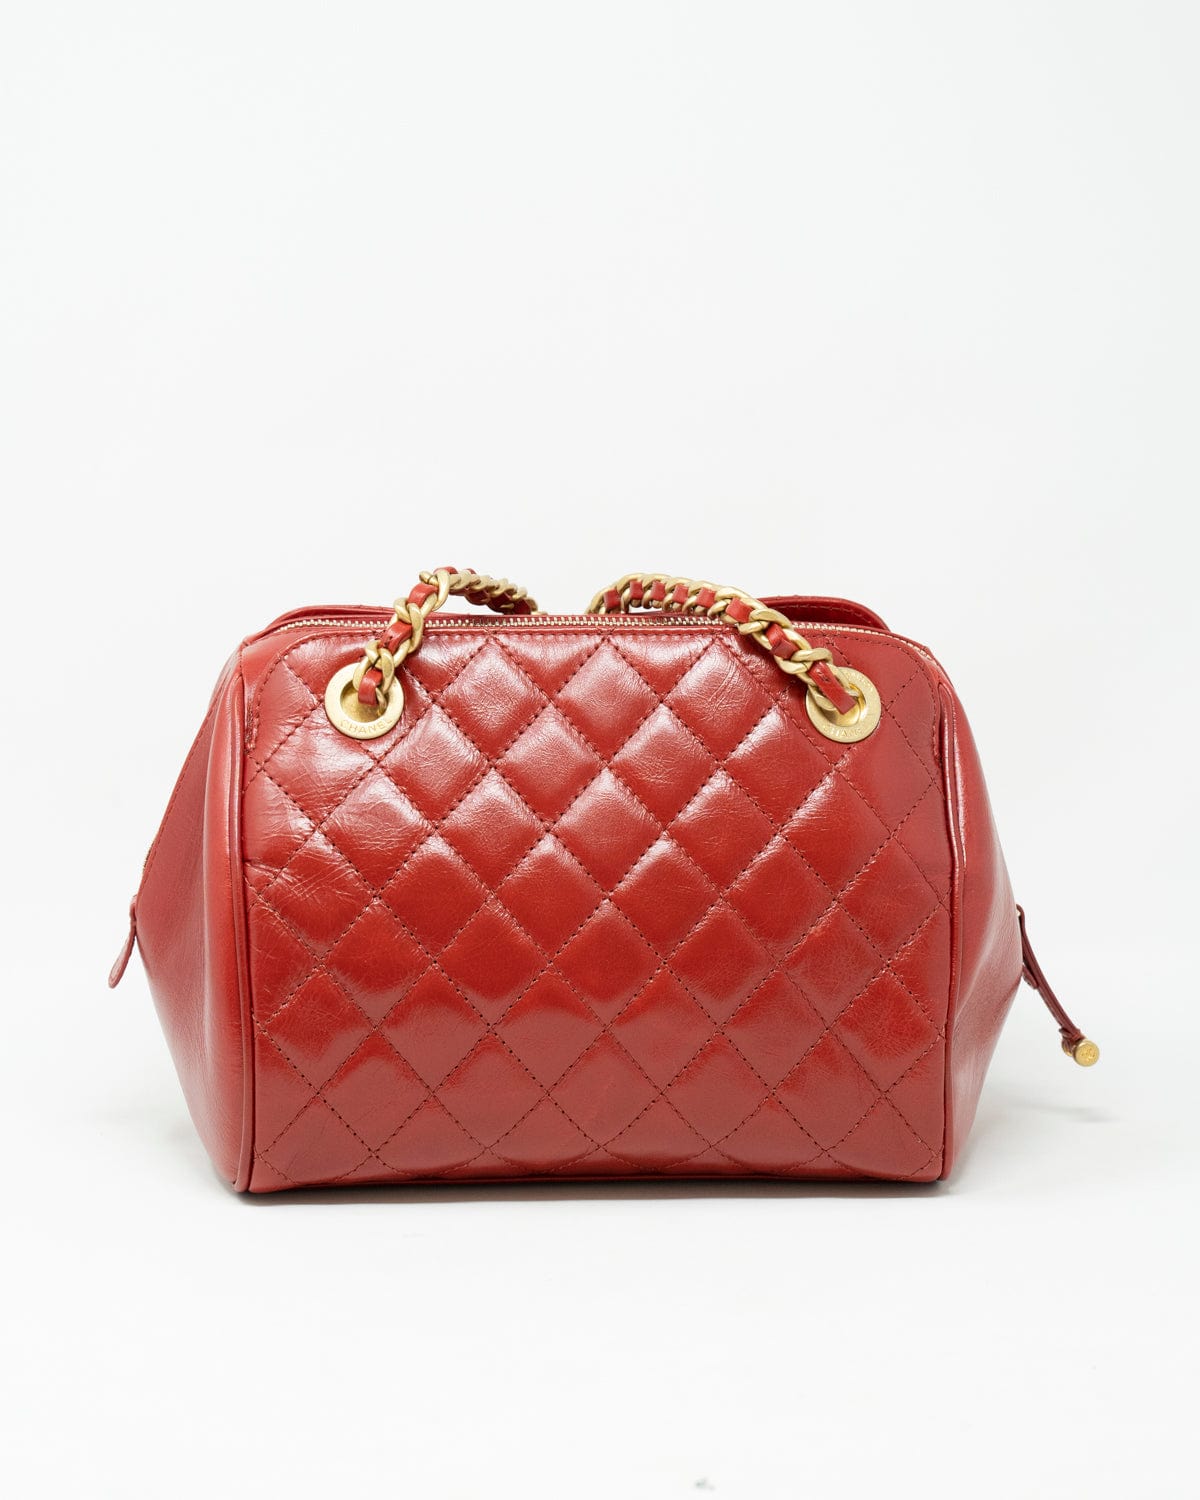 Chanel Chanel Red Goatskin Quilted Leather Tote Bag GHW  - AGL1707